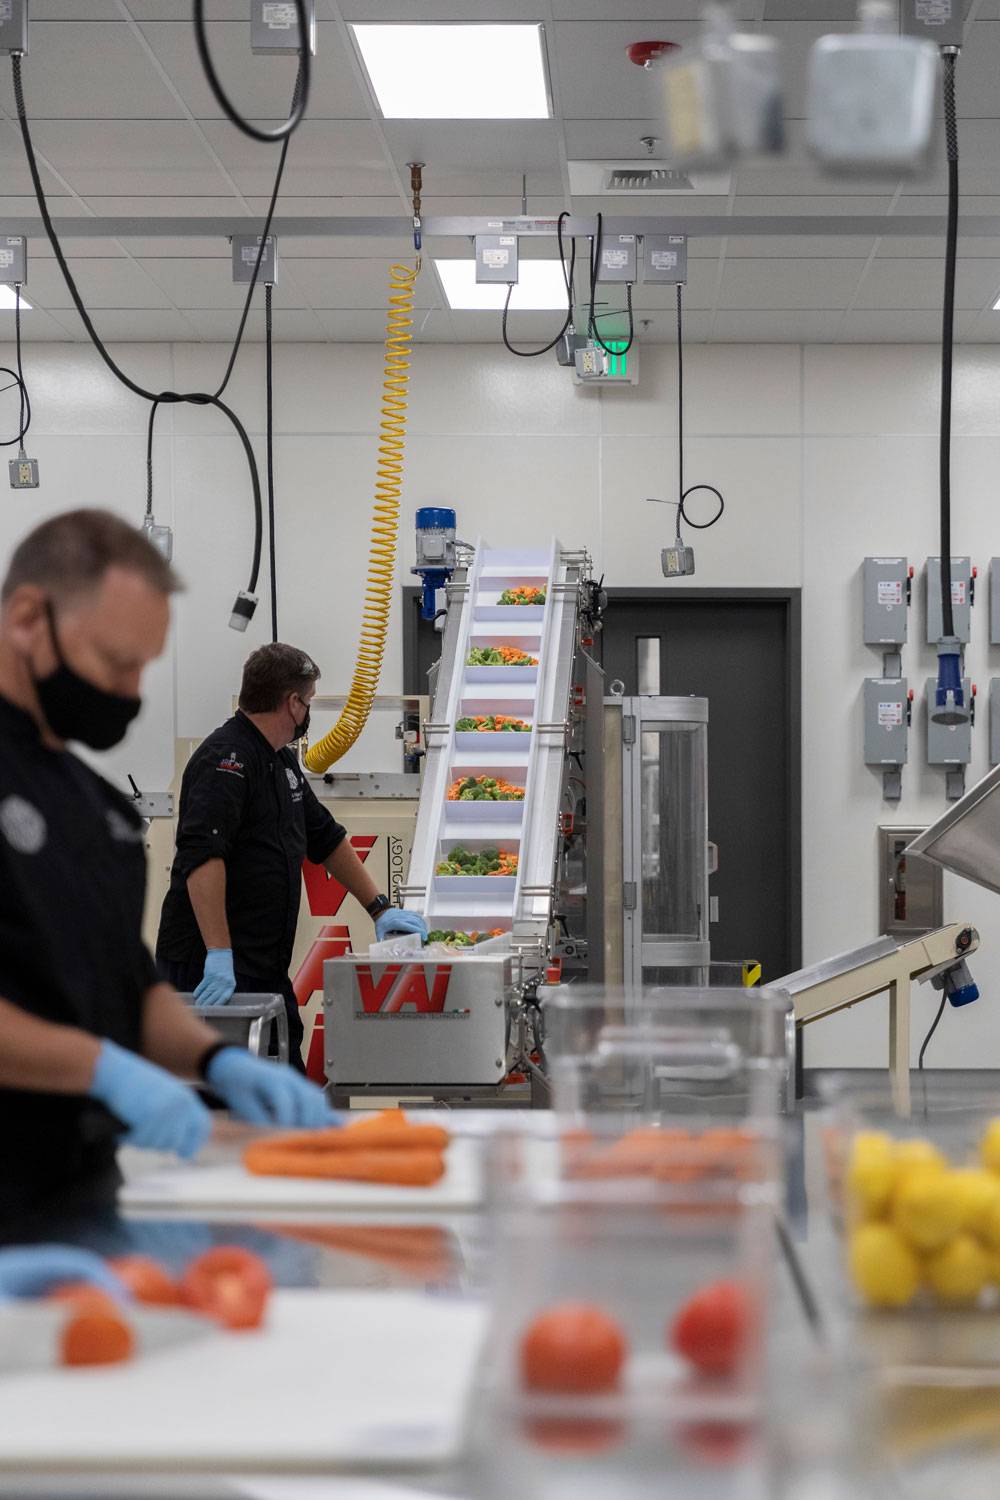 Sacramento City Unified School District. Chefs work with fresh vegetables in an assembly line.